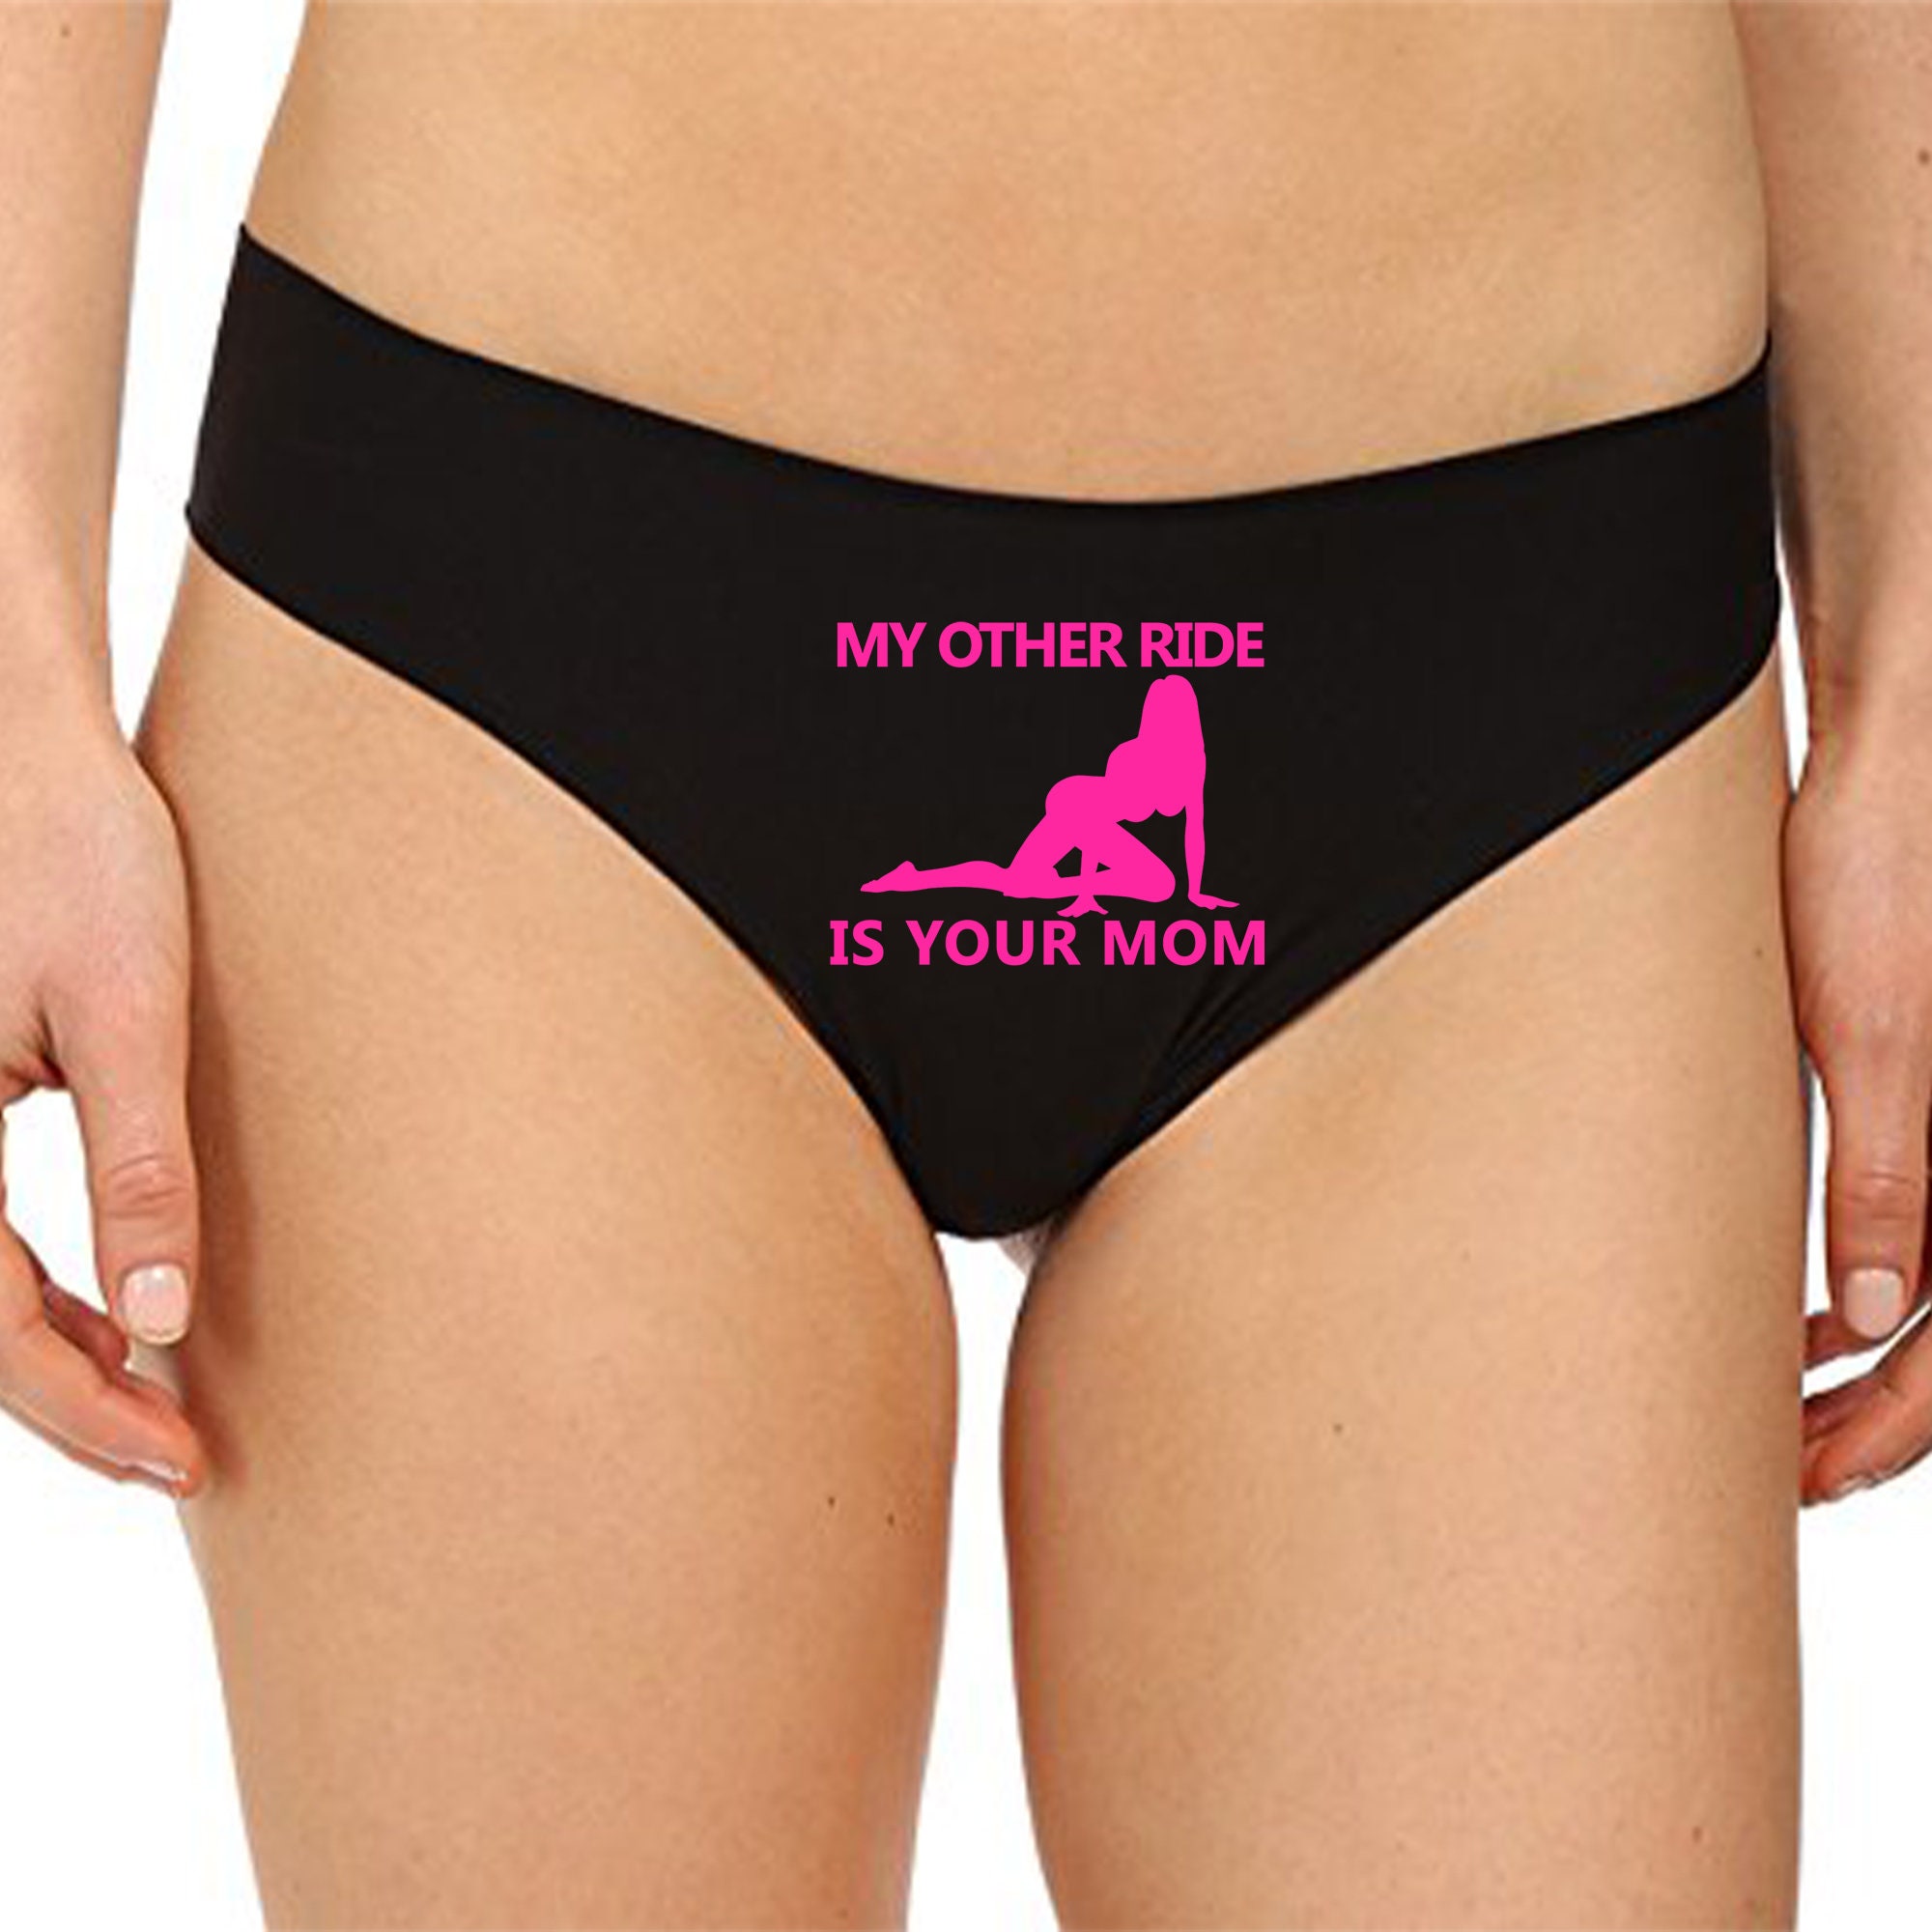 My Other Ride is Your Mom Panties Sexy Christmas Gift Funny Naughty Slutty  Booty Shorts Bachelorette Party Lingerie Womens Underwear 